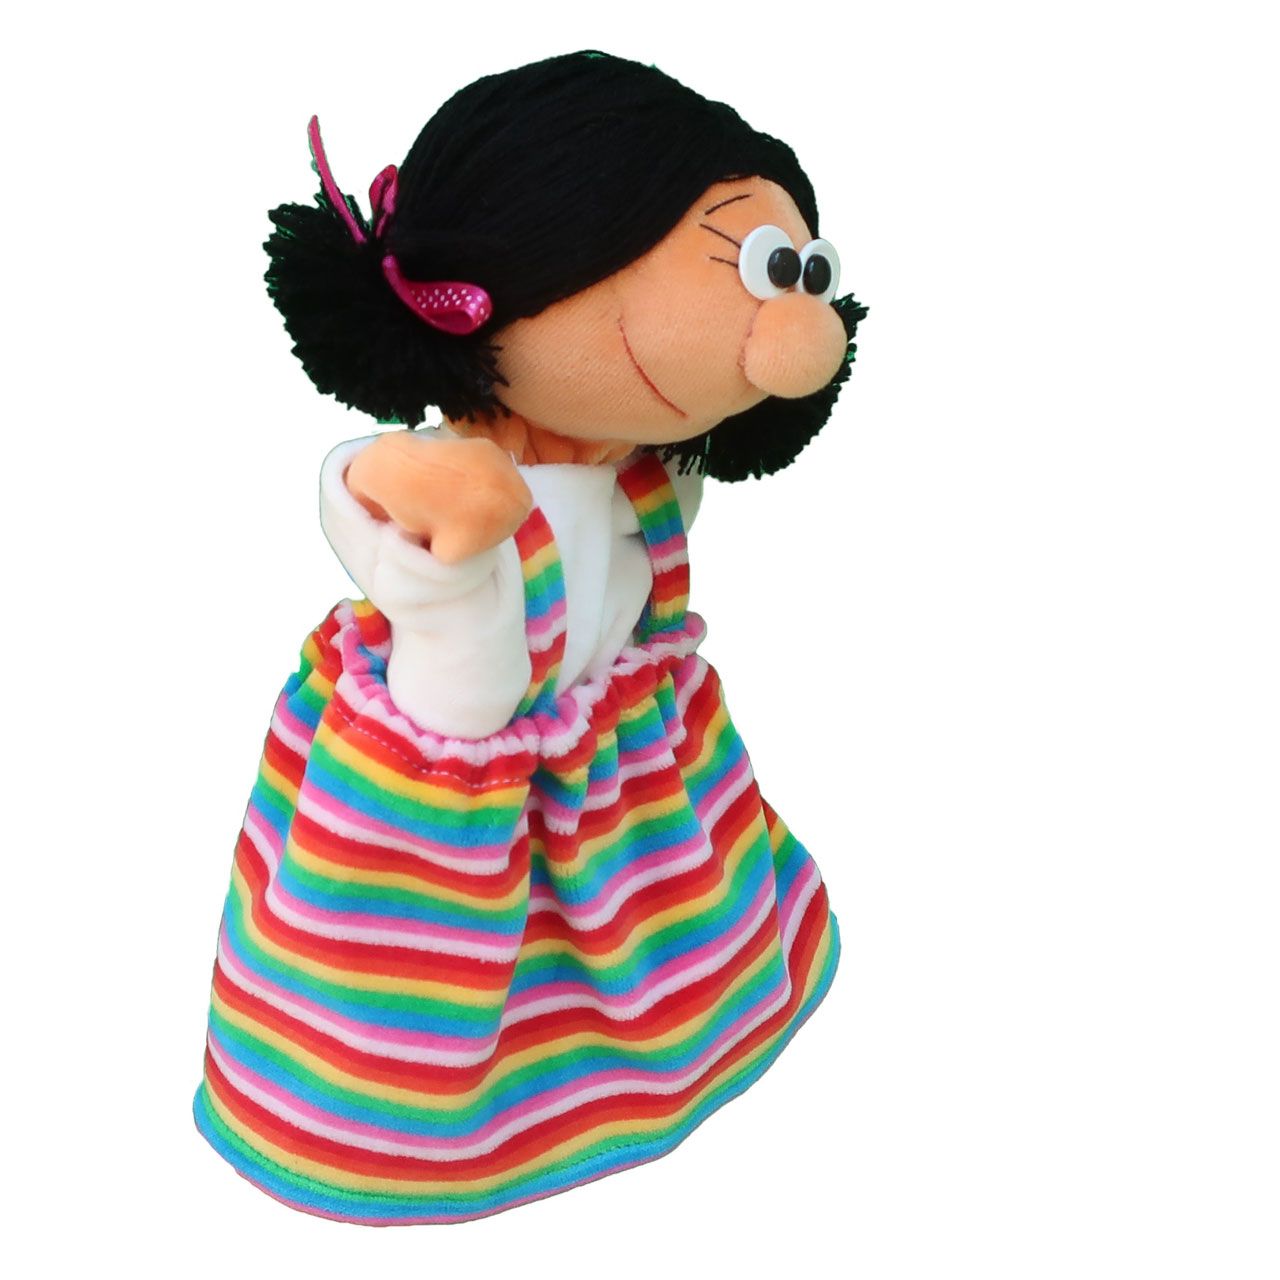 Hand puppet girl with black hair